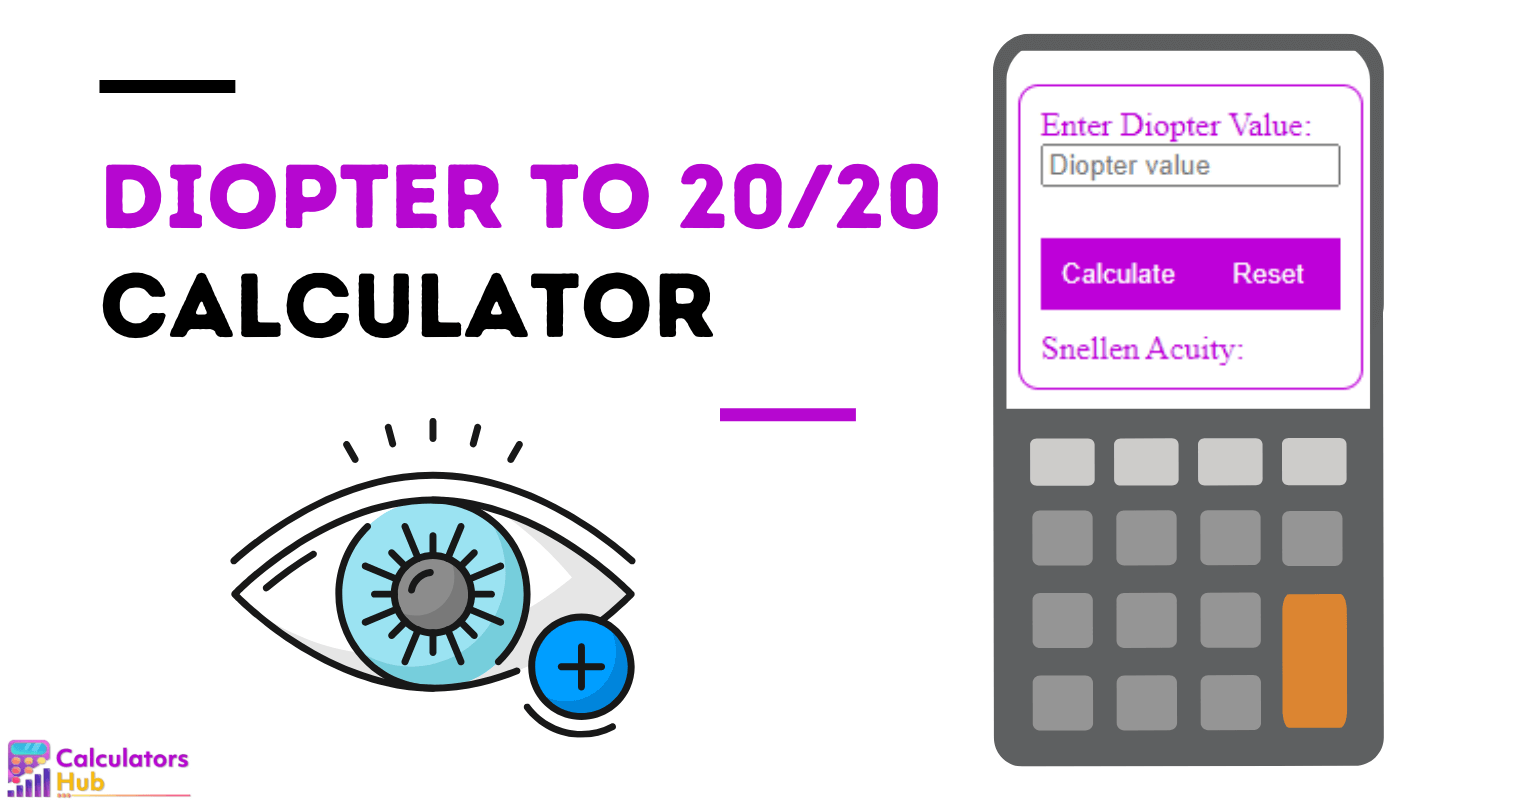 Diopter to 20/20 Calculator